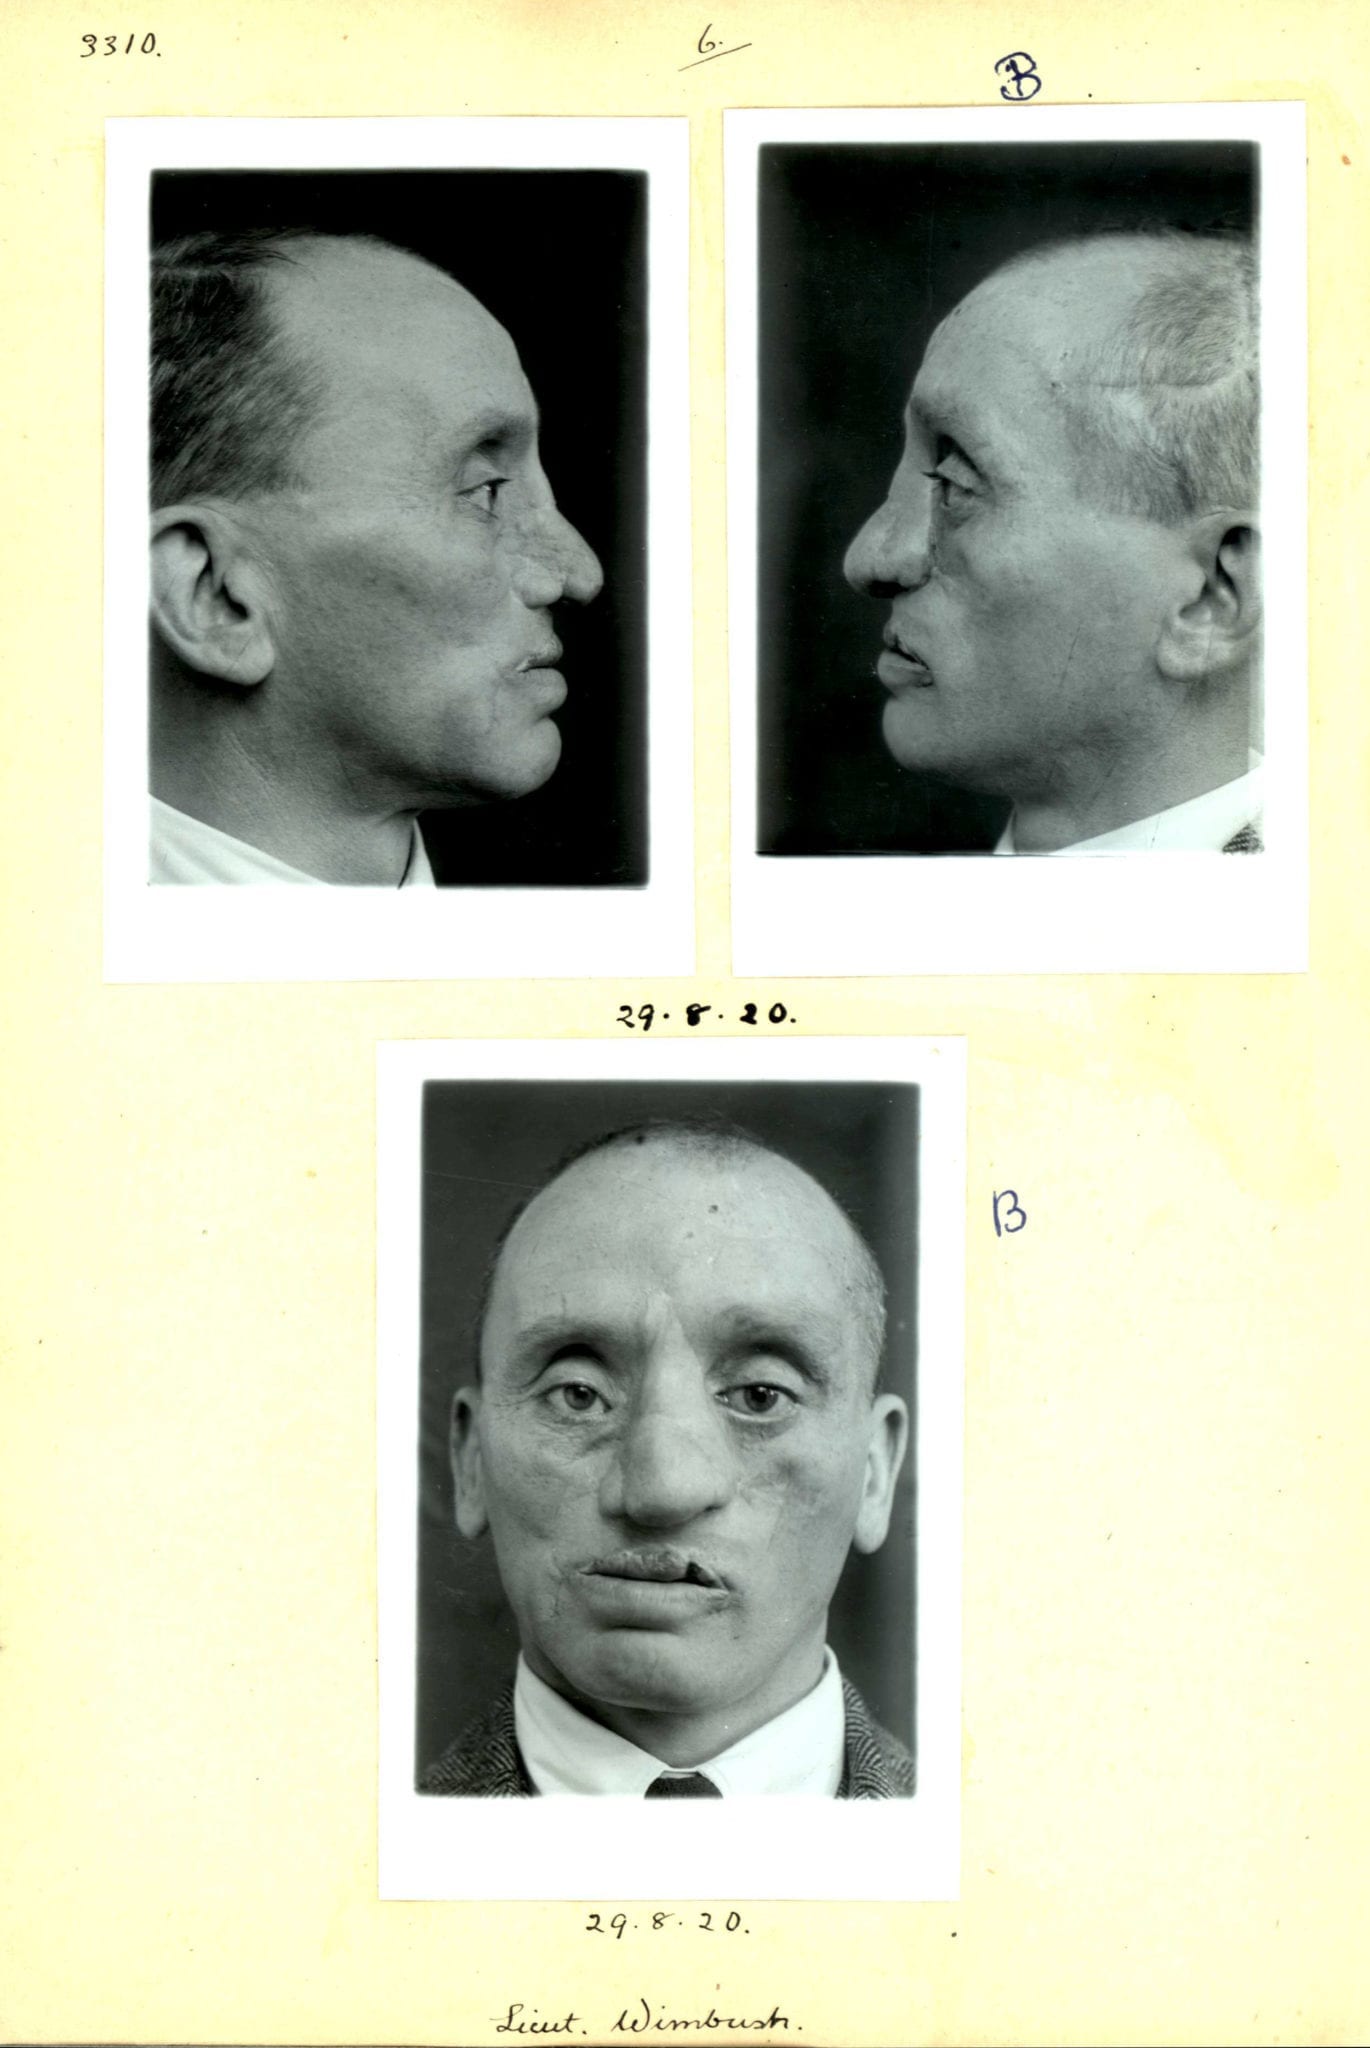 A series of black and white photographs showing the progression of reconstruction following facial injury.